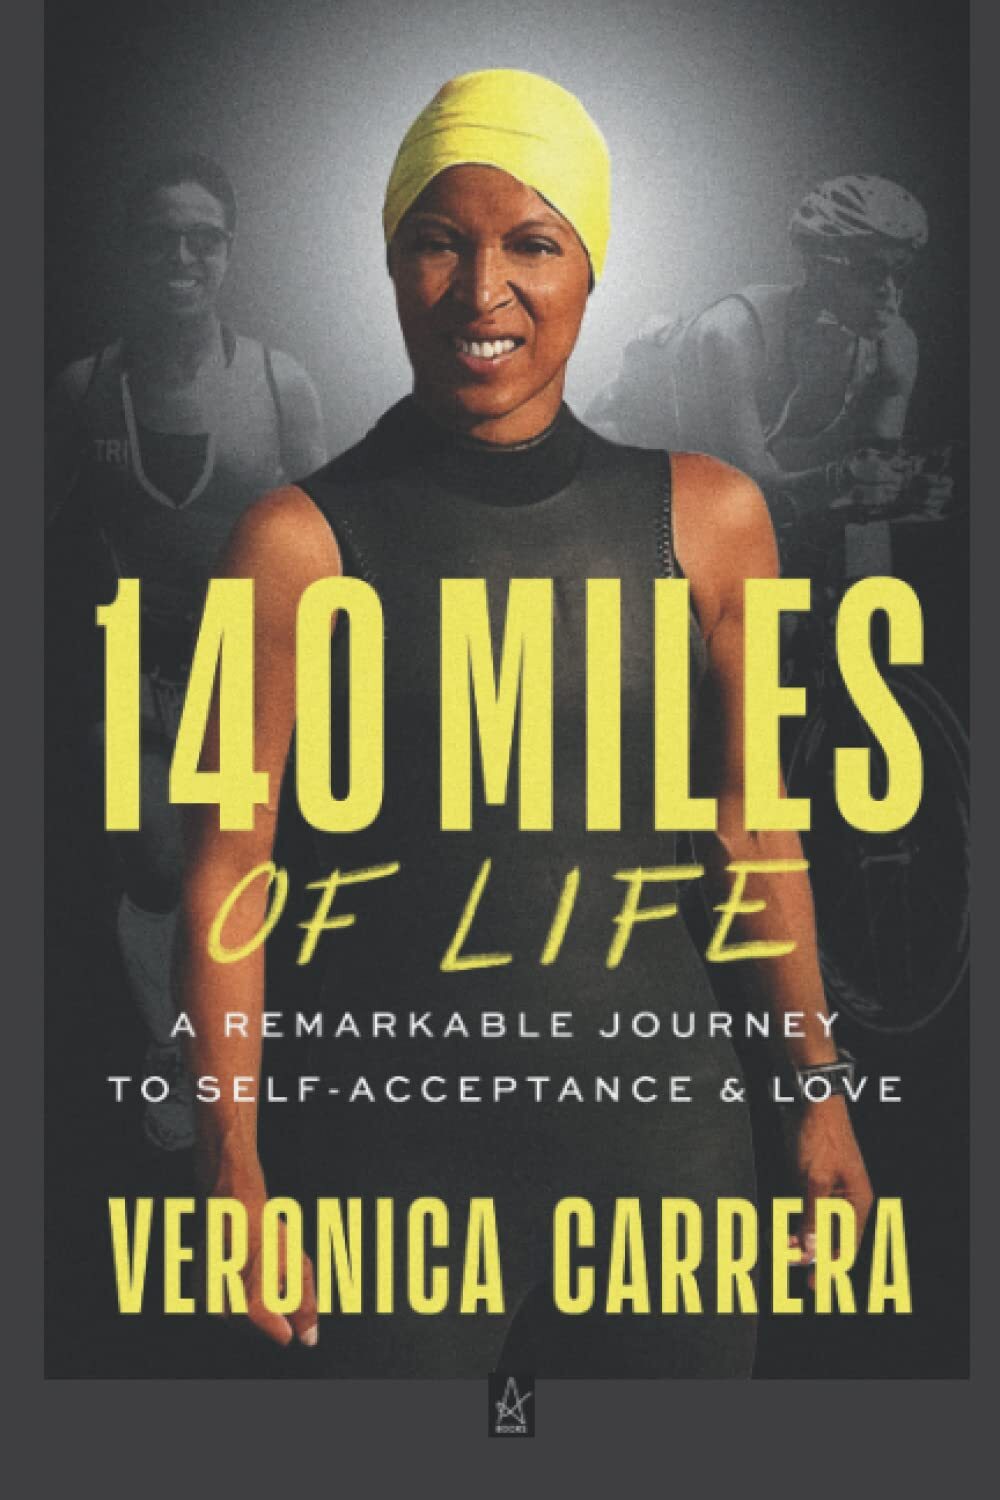 213 | Veronica Carrera - The Amazingly Talented Author of ”140 Miles of Life” Image